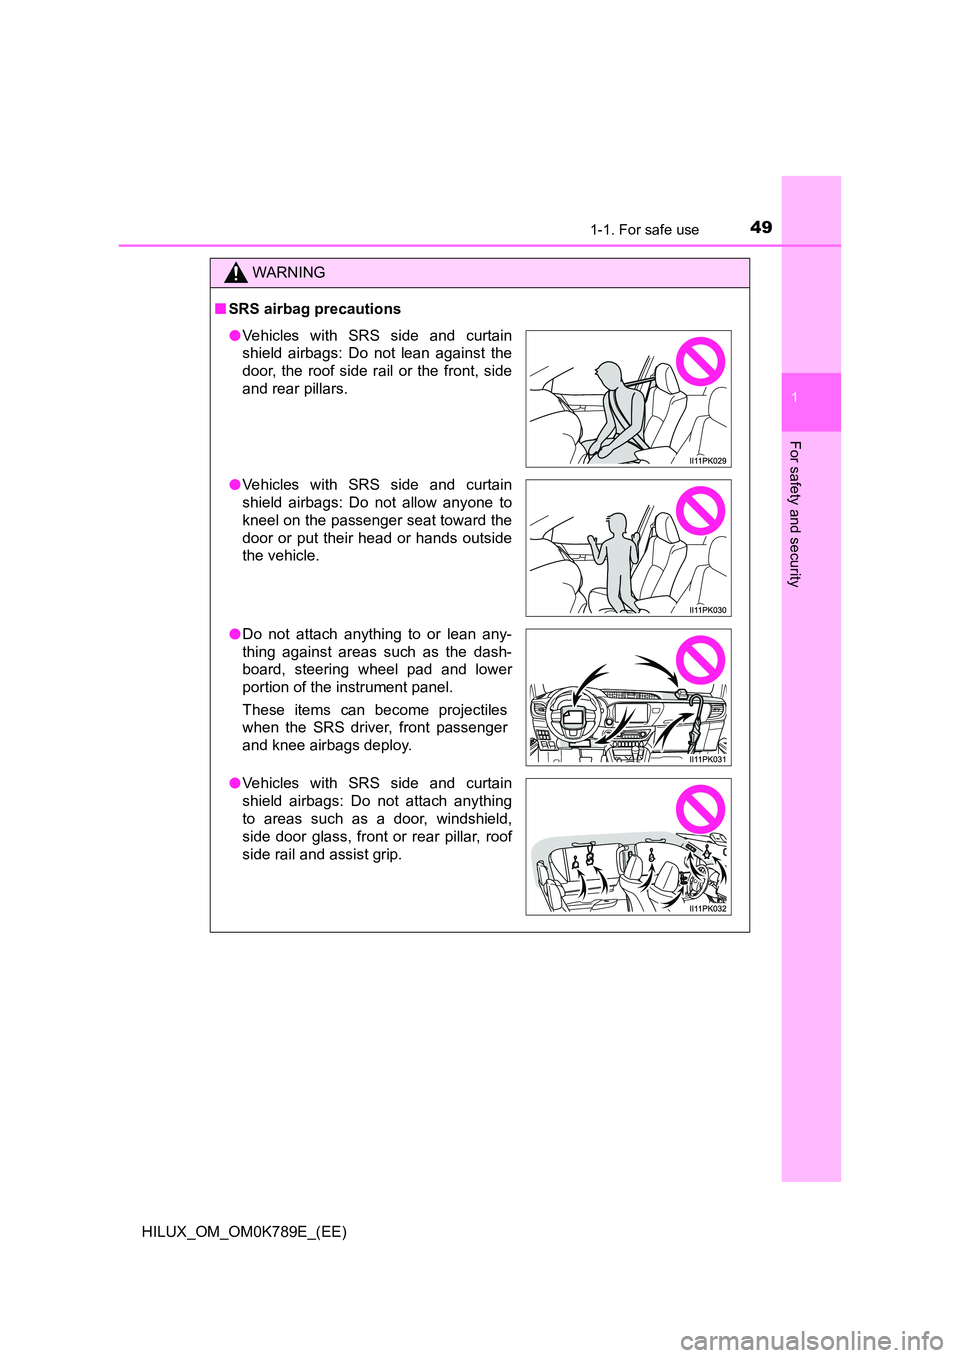 TOYOTA HILUX 2023  Owners Manual 491-1. For safe use
1
HILUX_OM_OM0K789E_(EE)
For safety and security
WARNING
■SRS airbag precautions
●Vehicles with SRS side and curtain 
shield airbags: Do not lean against the 
door, the roof si